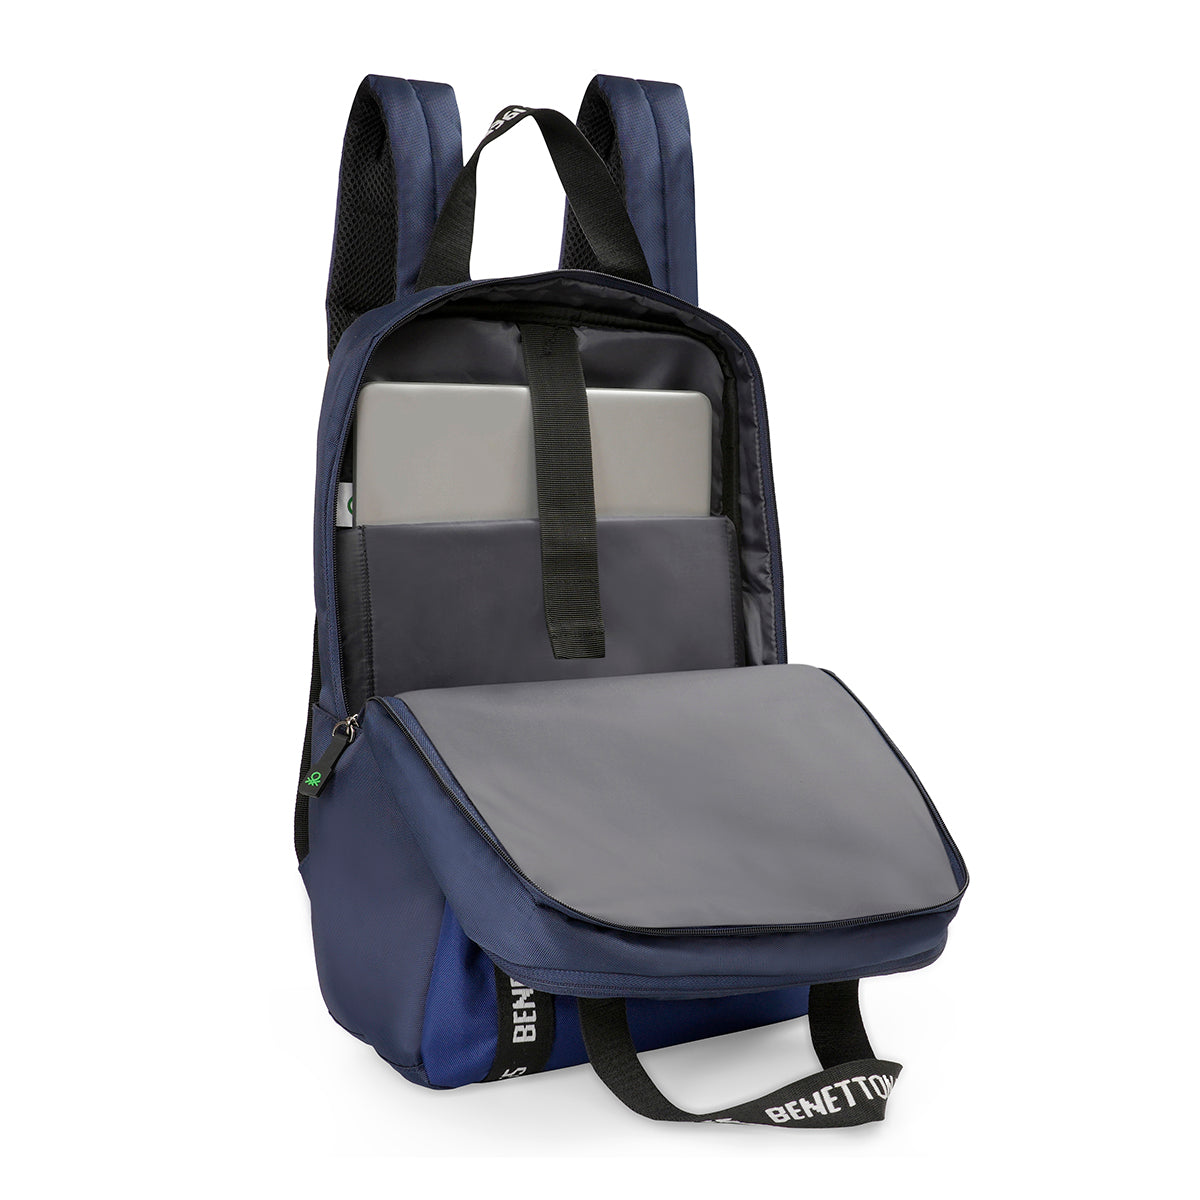 United Colors of Benetton Salerno Laptop Backpack Navy